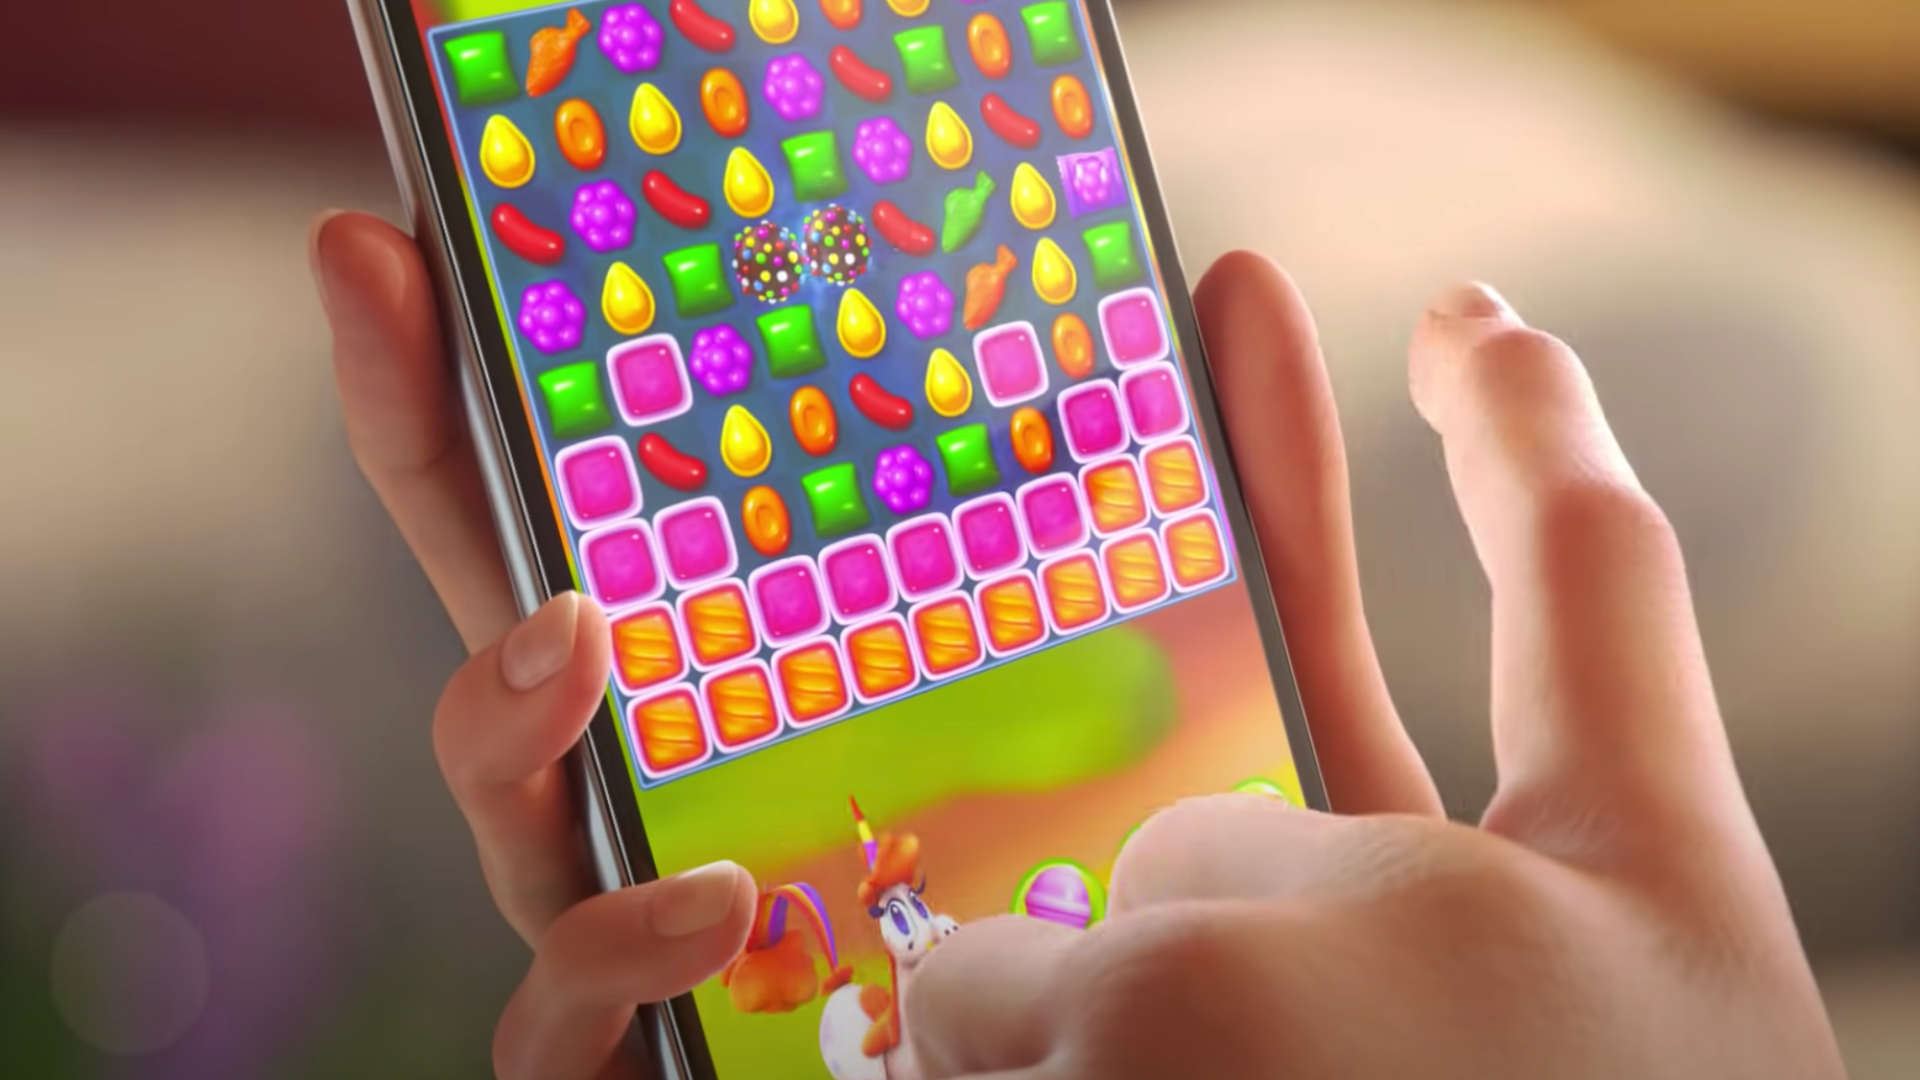 Candy Crush Saga for Android - Free App Download